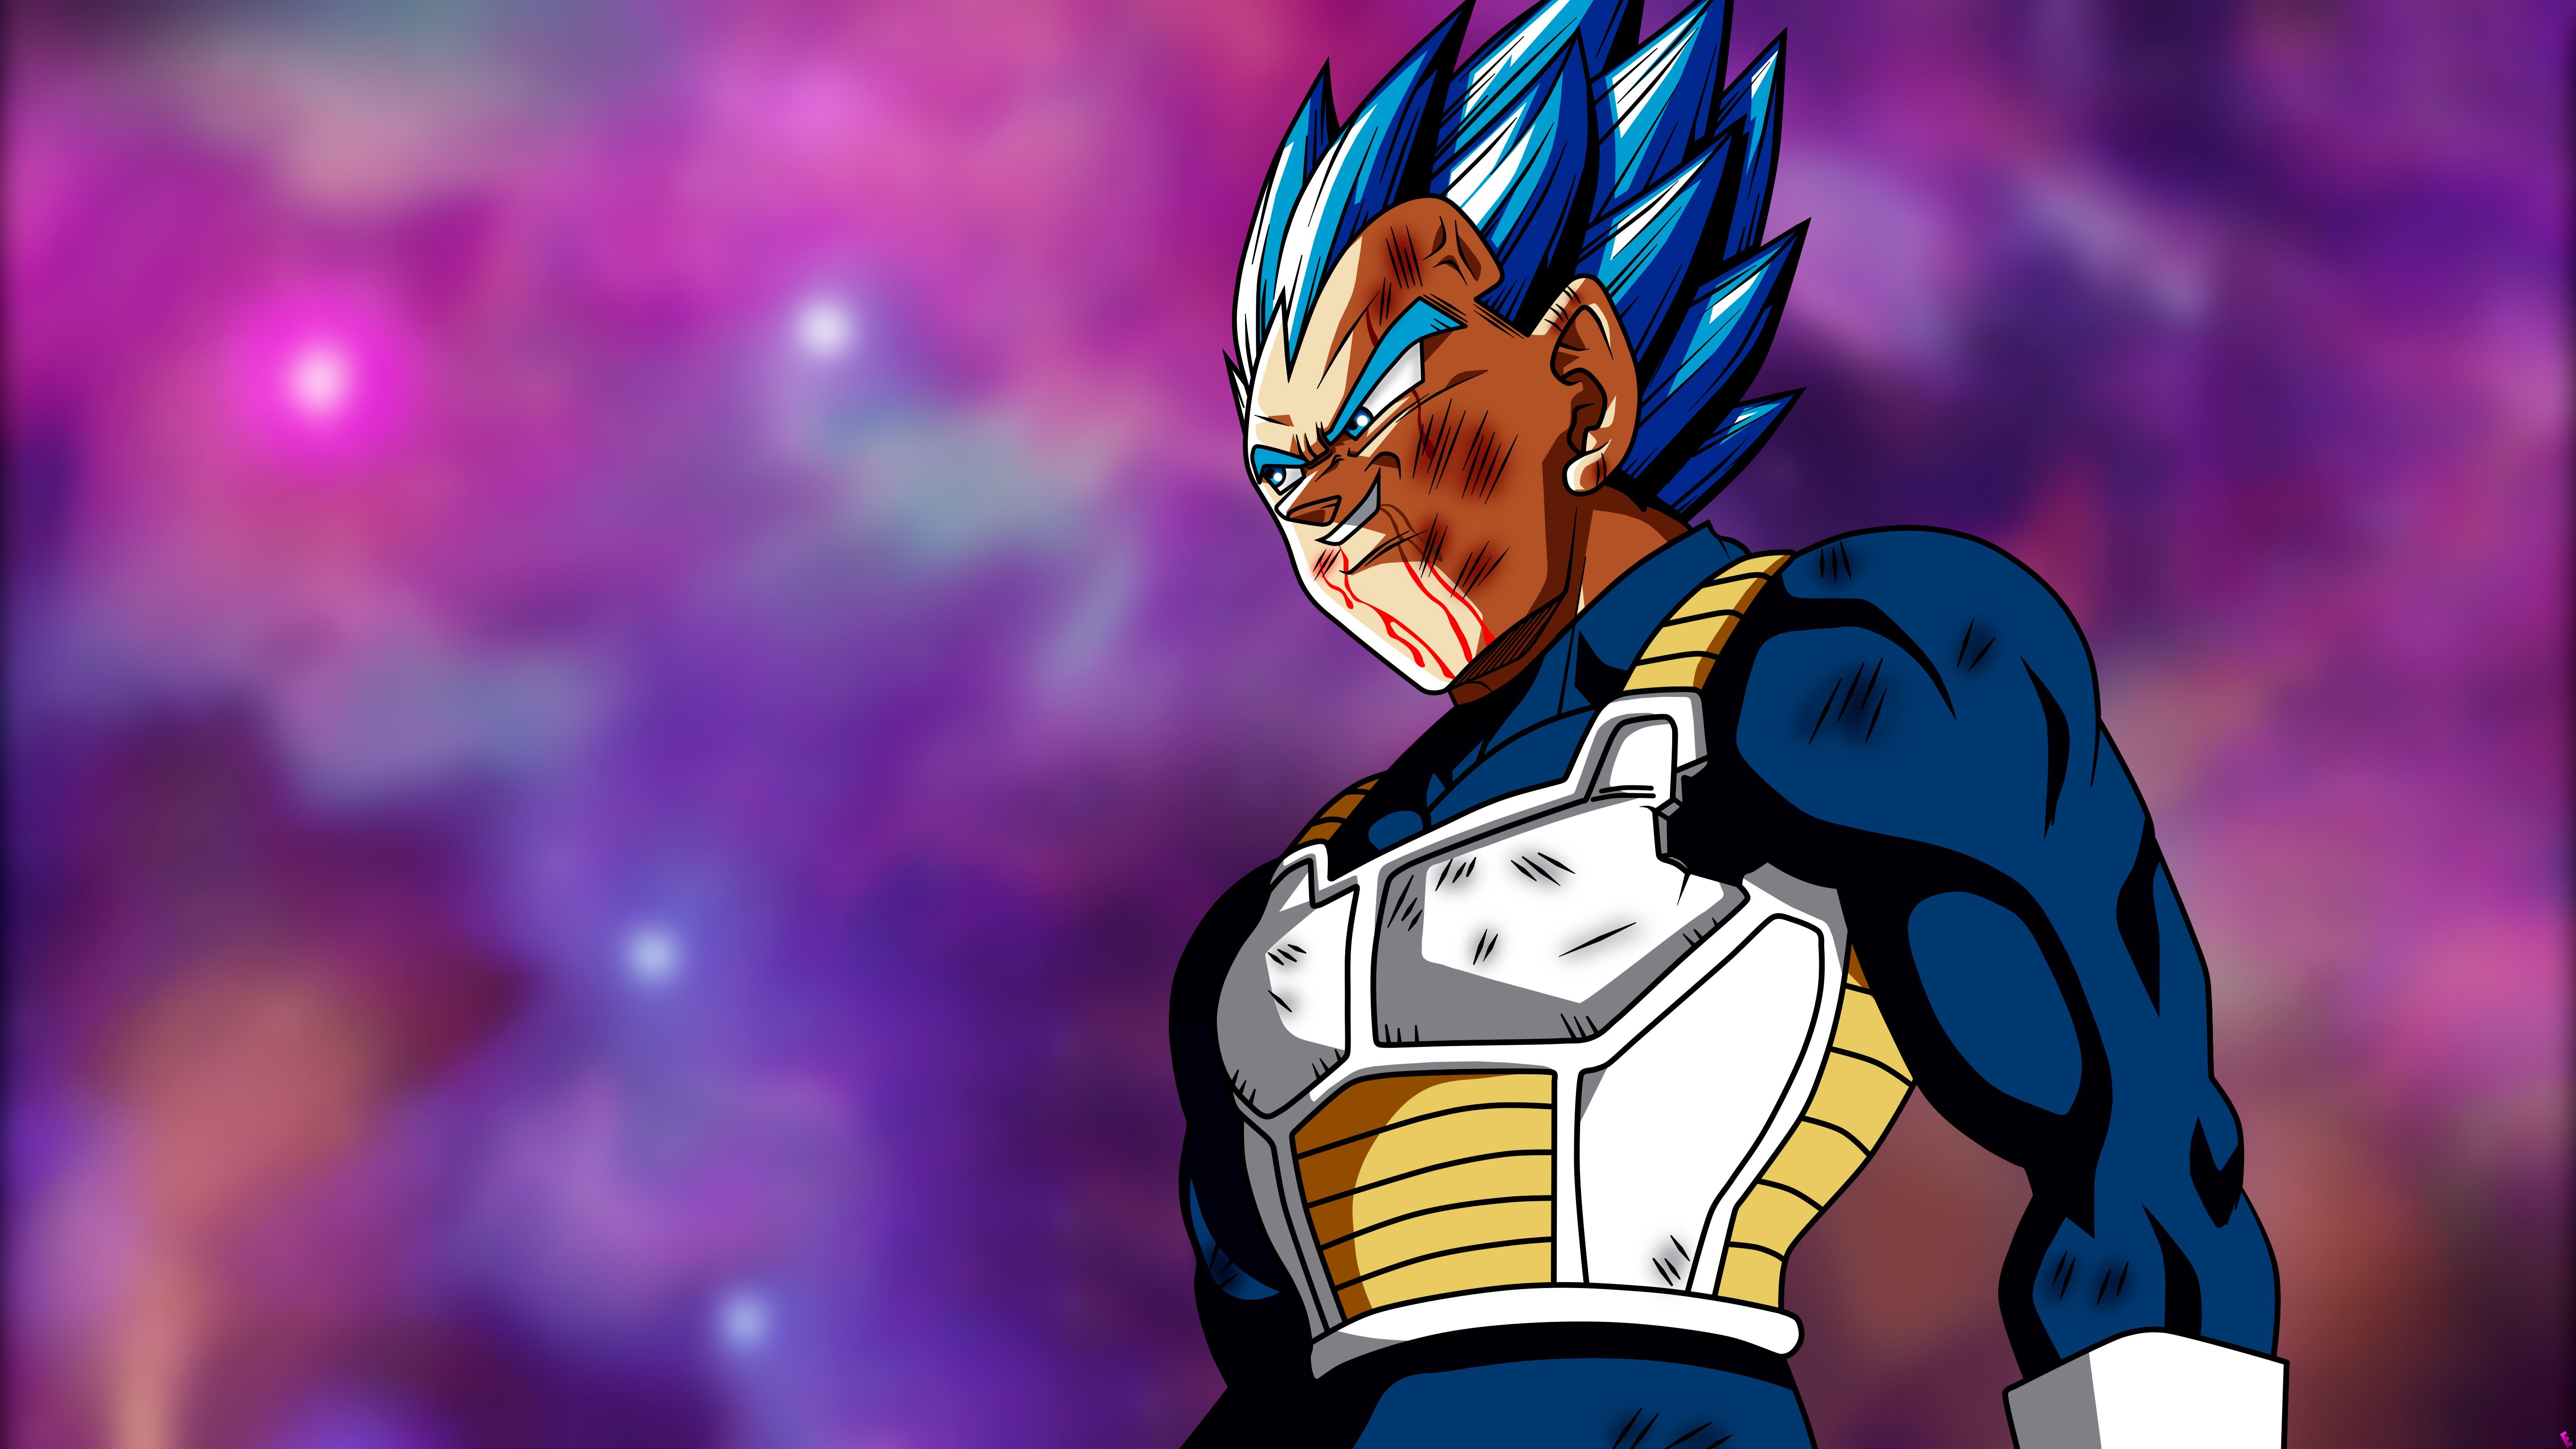 2048x2048 Dragon Ball Super Vegeta Ipad Air HD 4k Wallpapers, Image, Backgrounds, Photos and Pictures